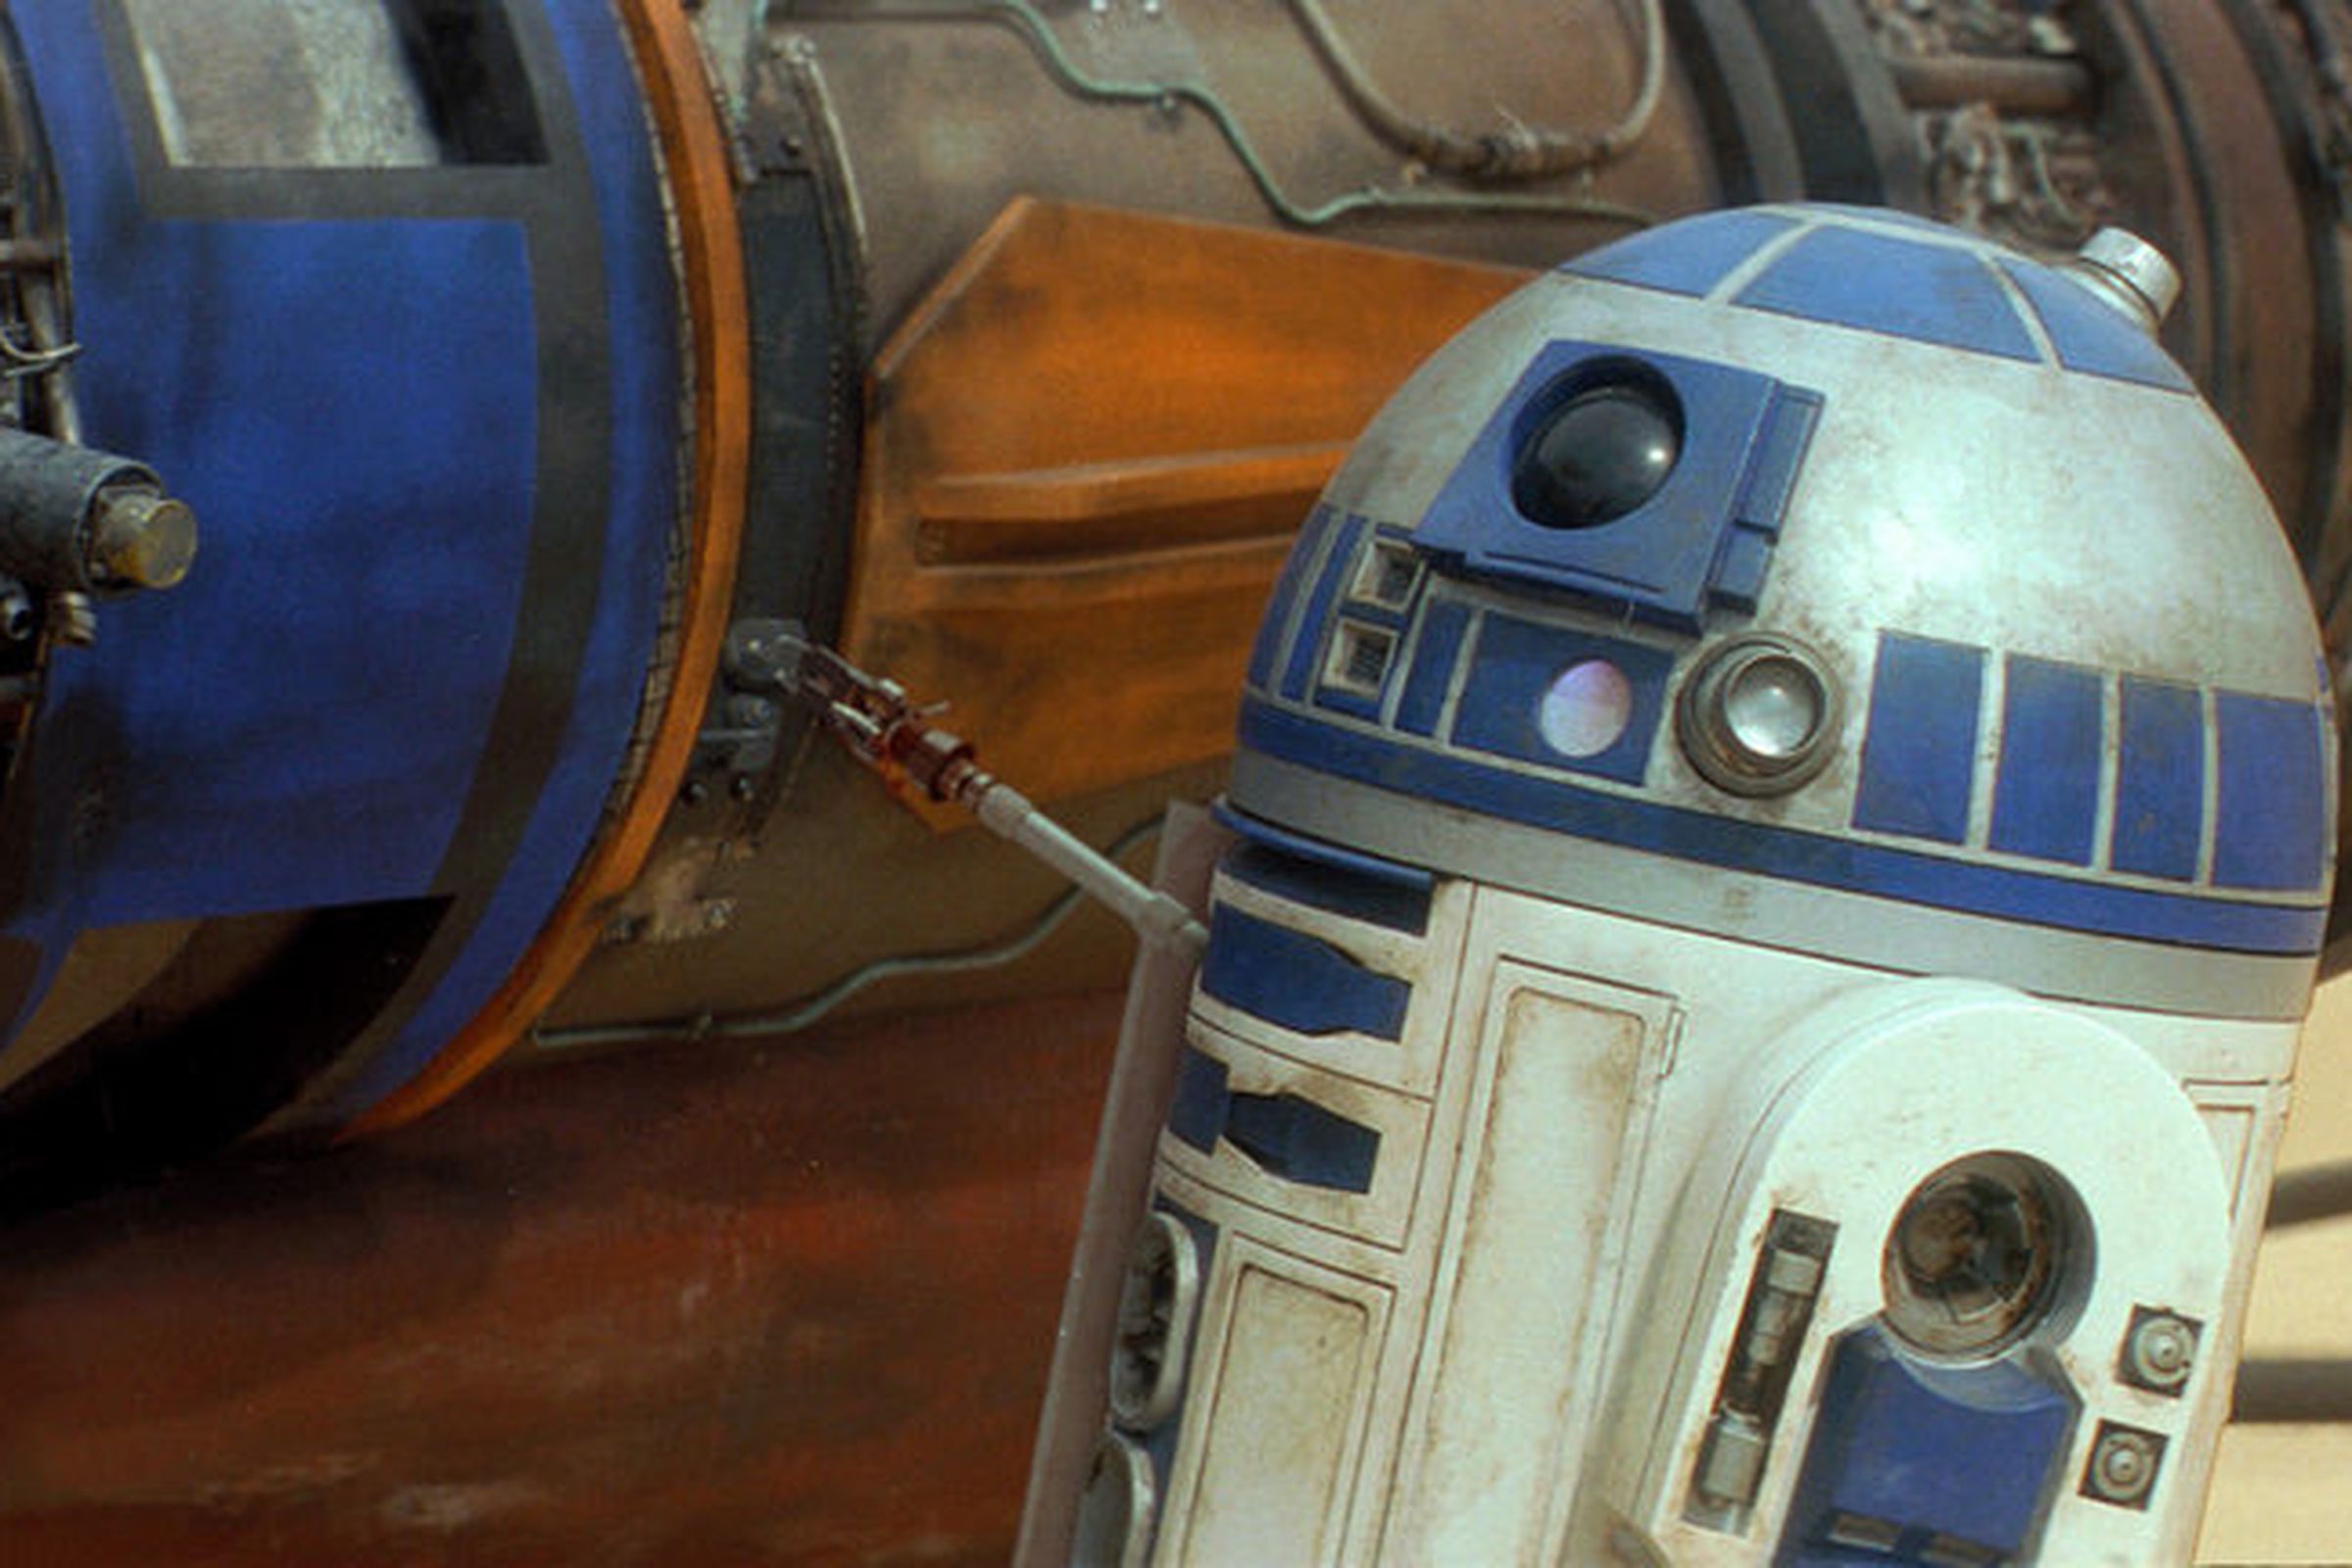 R2-D2 in a screenshot from 'Star Wars Episode I: The Phantom Menace'